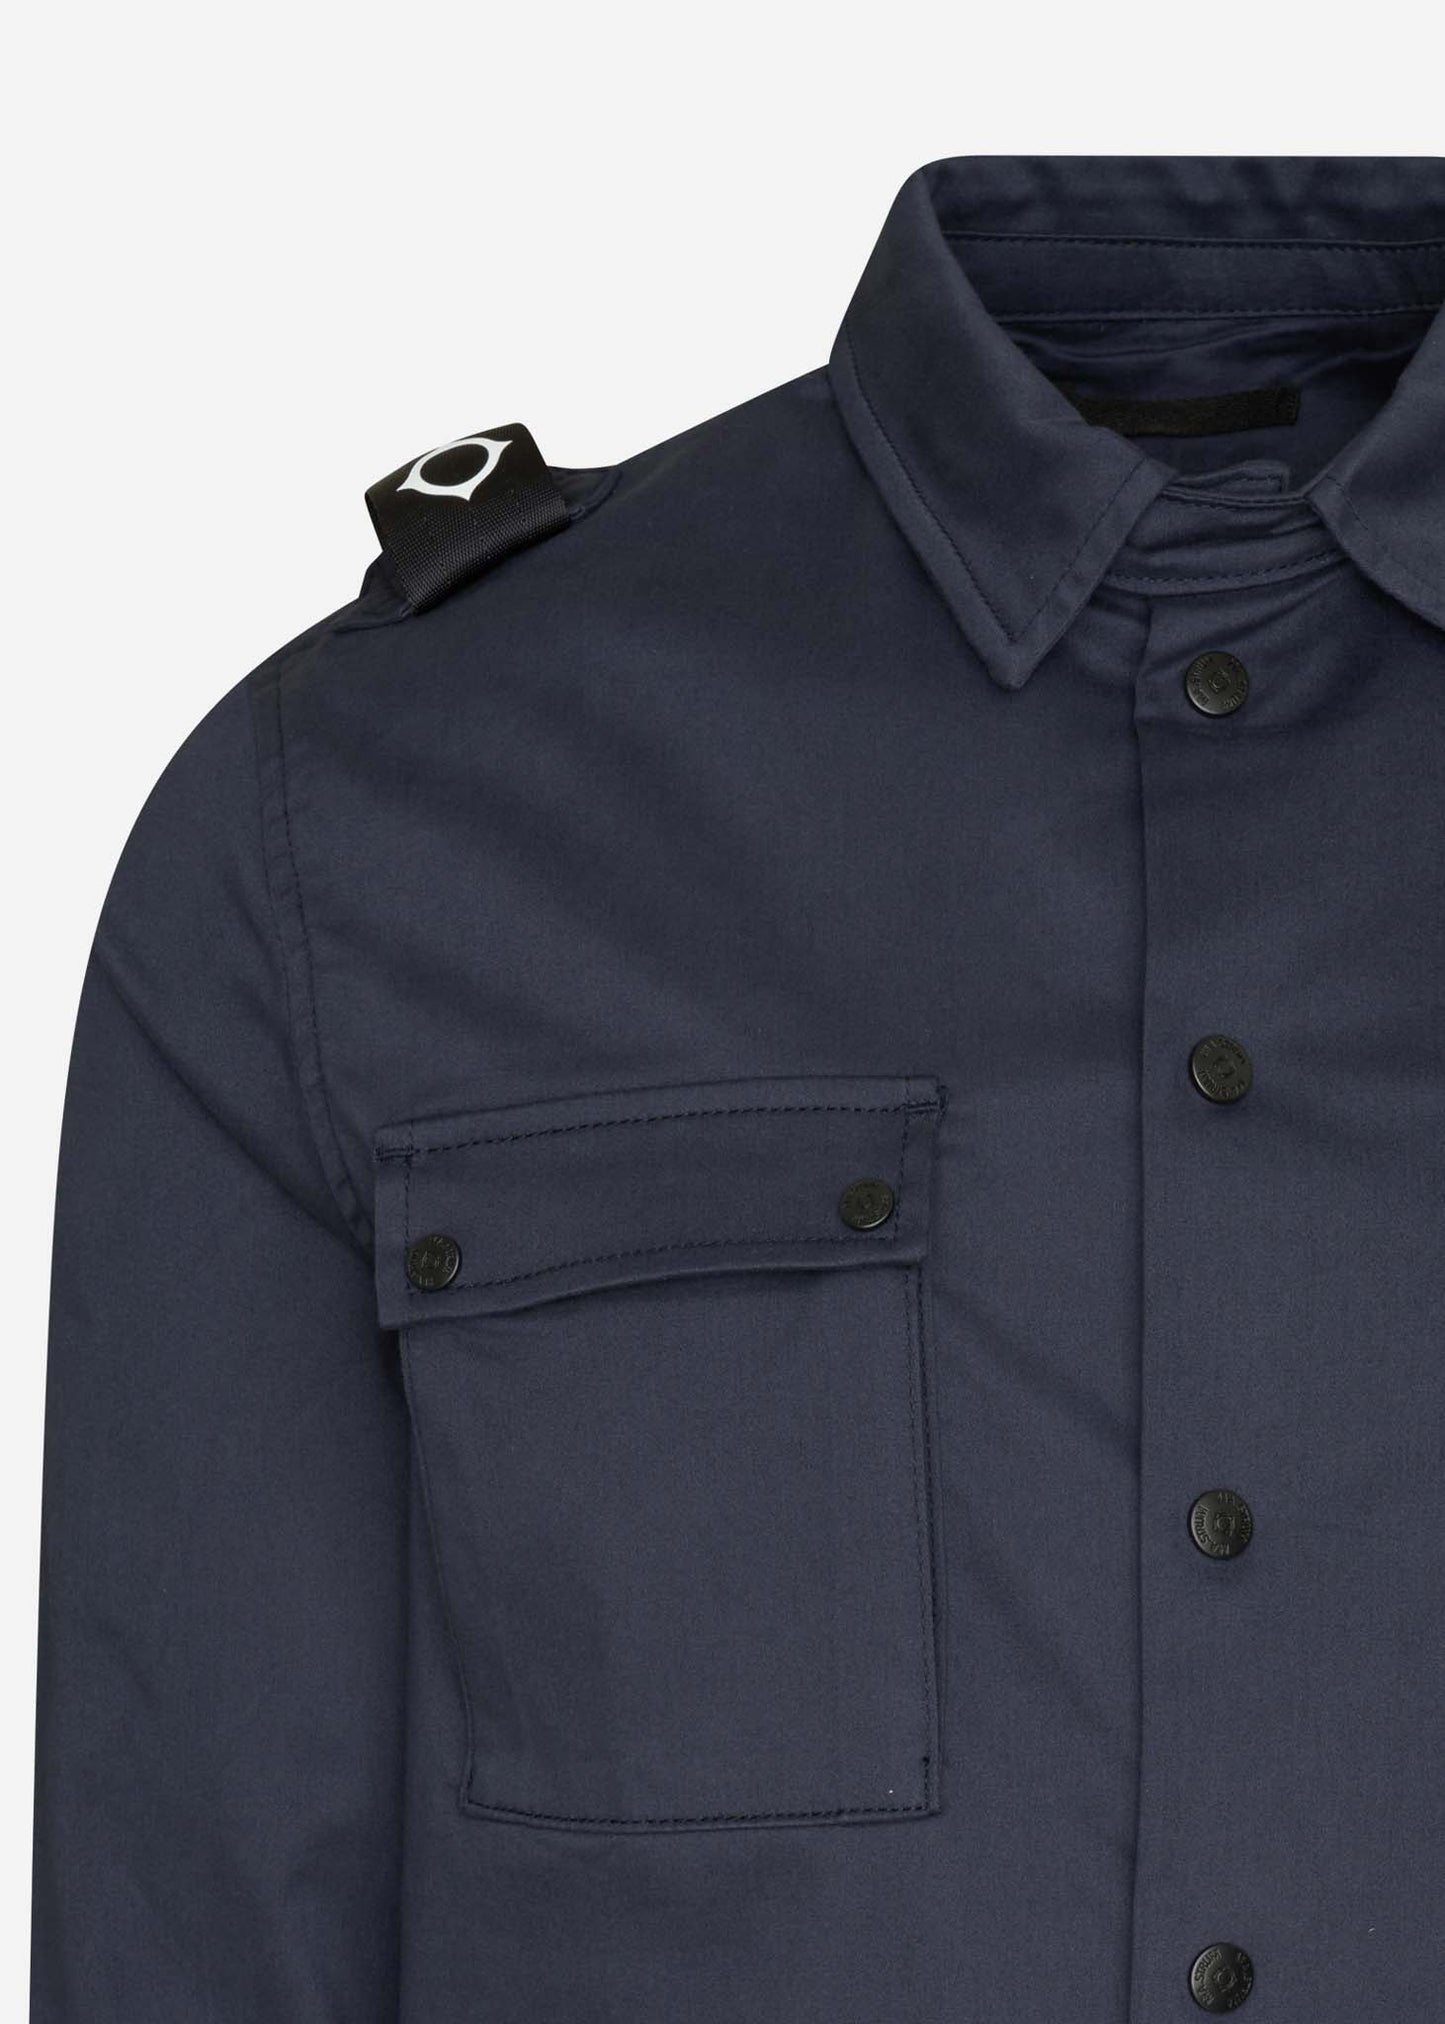 DH two pocket overshirt - ink navy